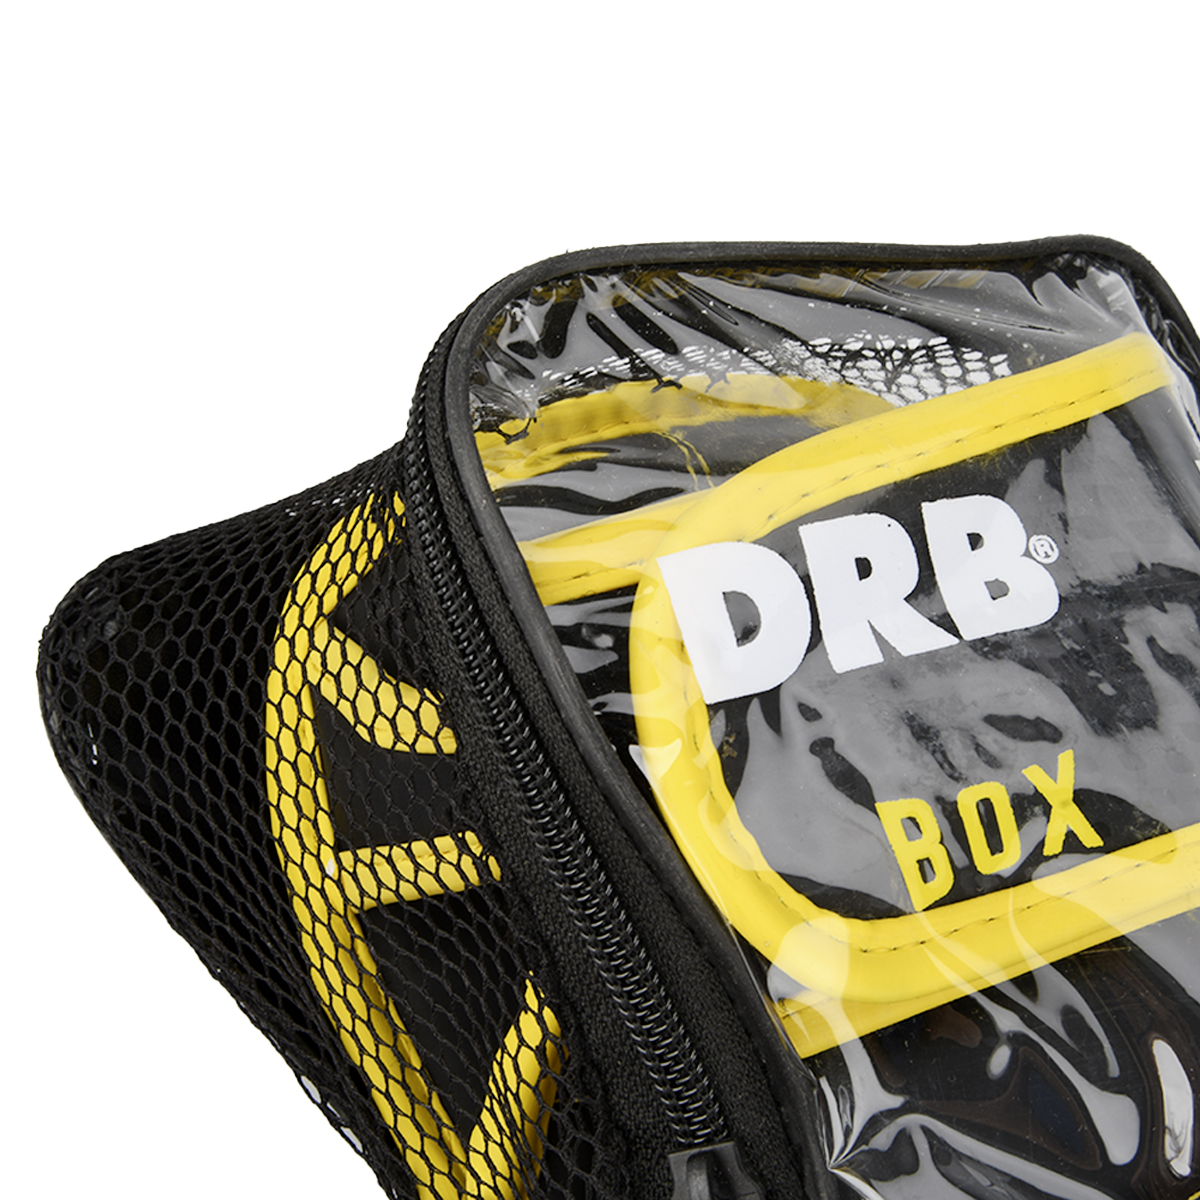 Guantes Dribbling Entrenamiento Box,  image number null